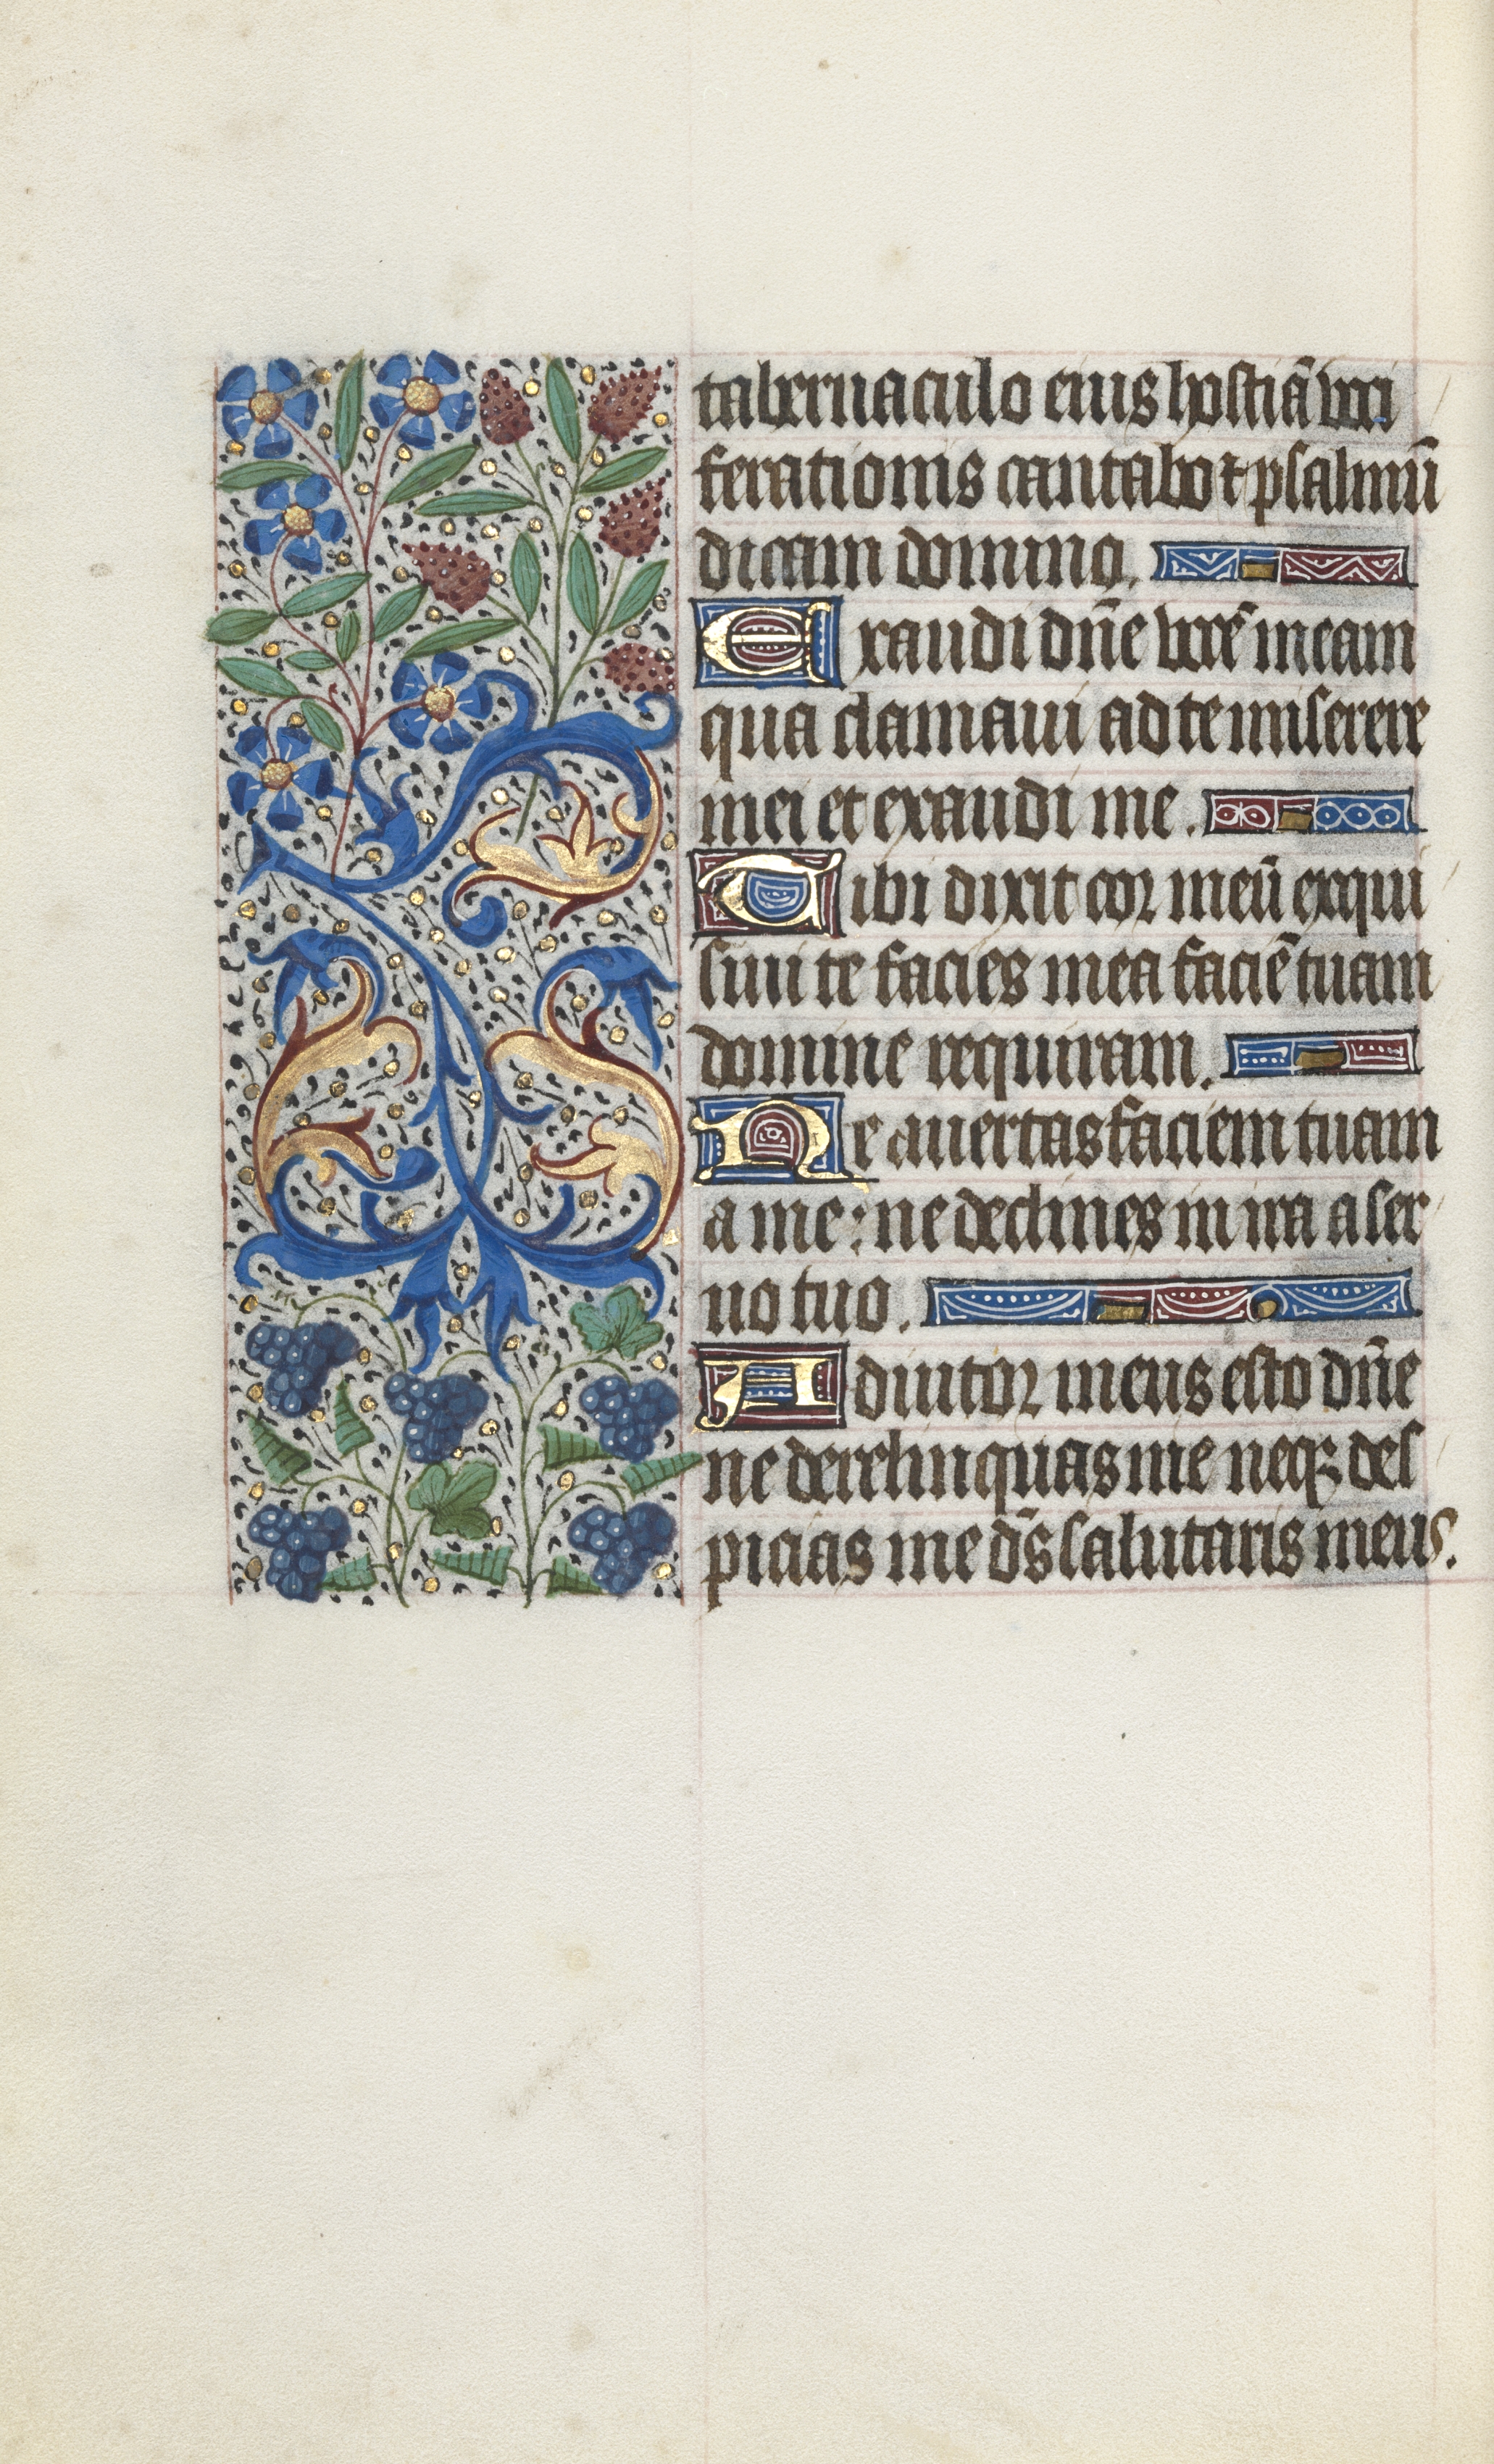 Book of Hours (Use of Rouen): fol. 121v